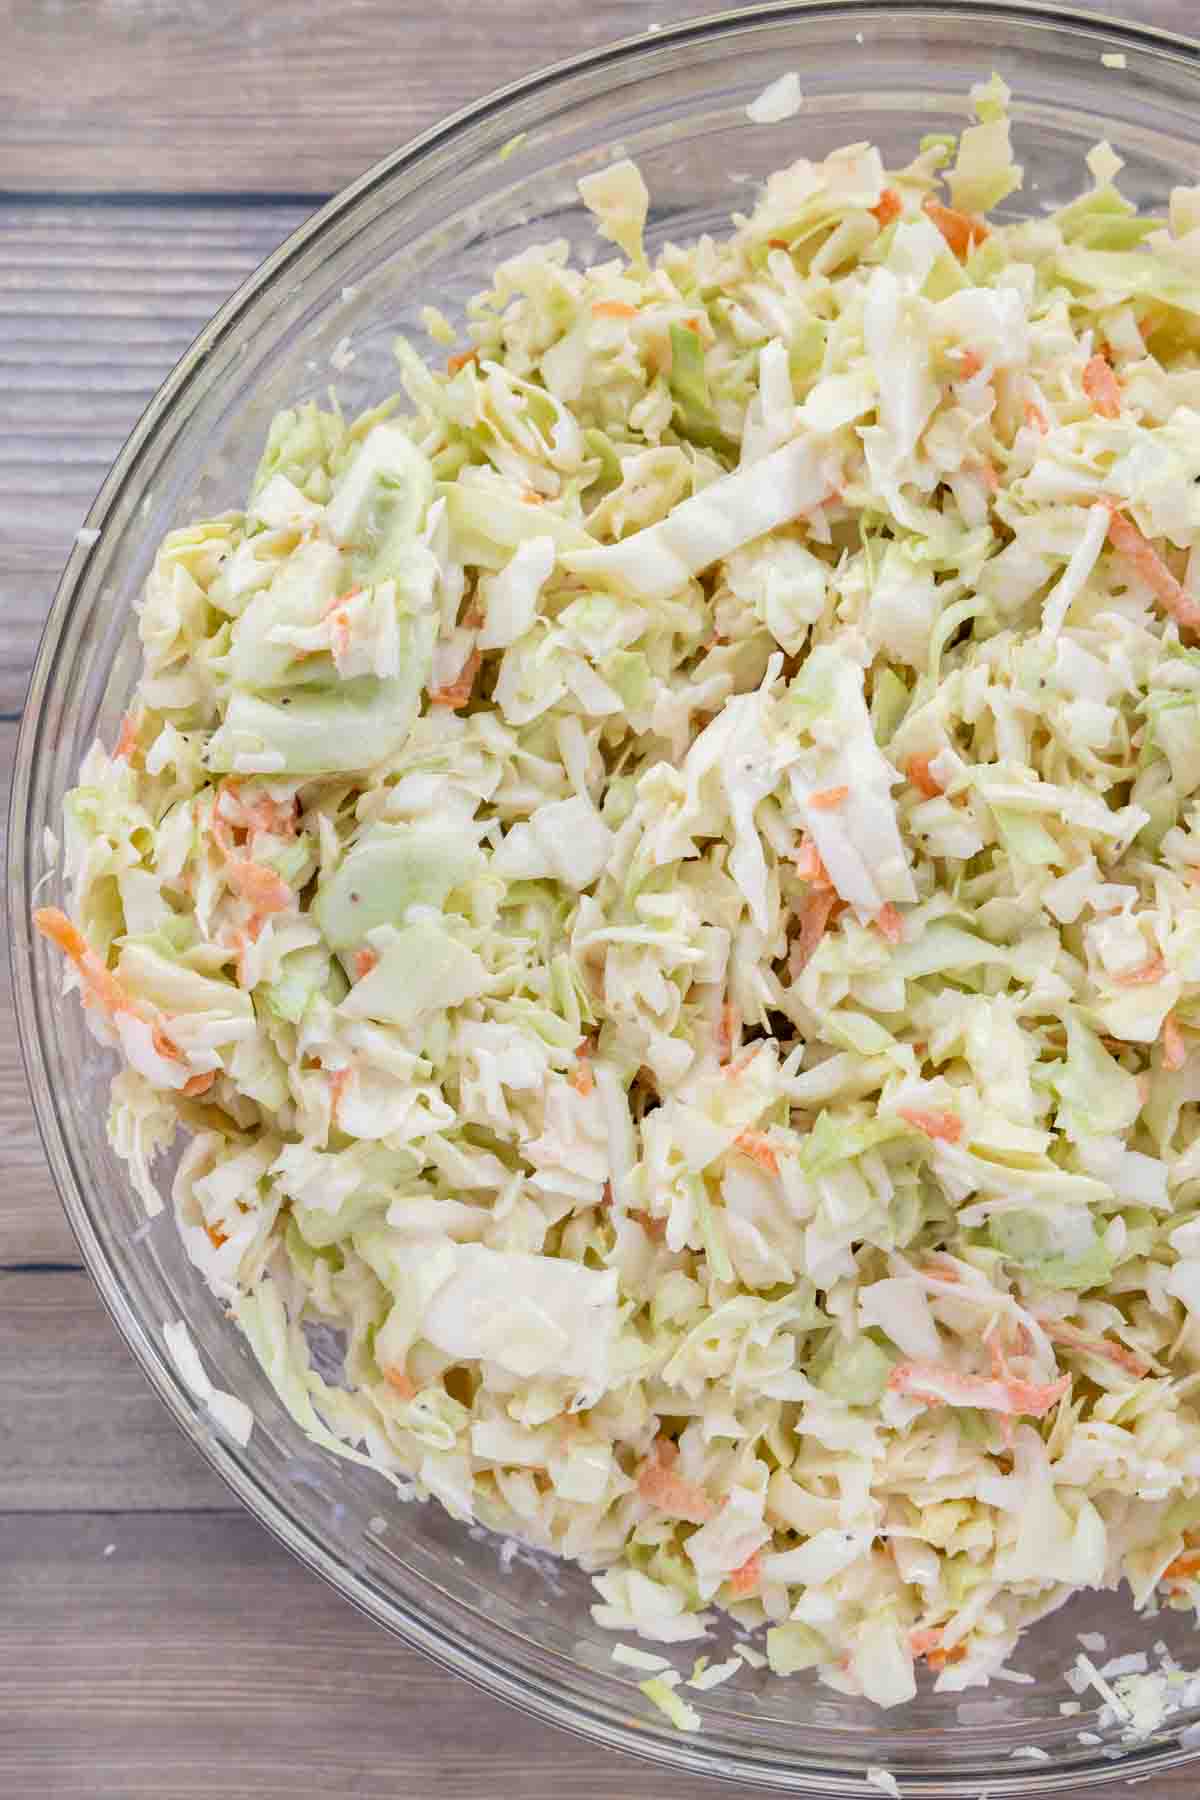 shredded cabbage and carrots mixed with dressing in a glass bowl.